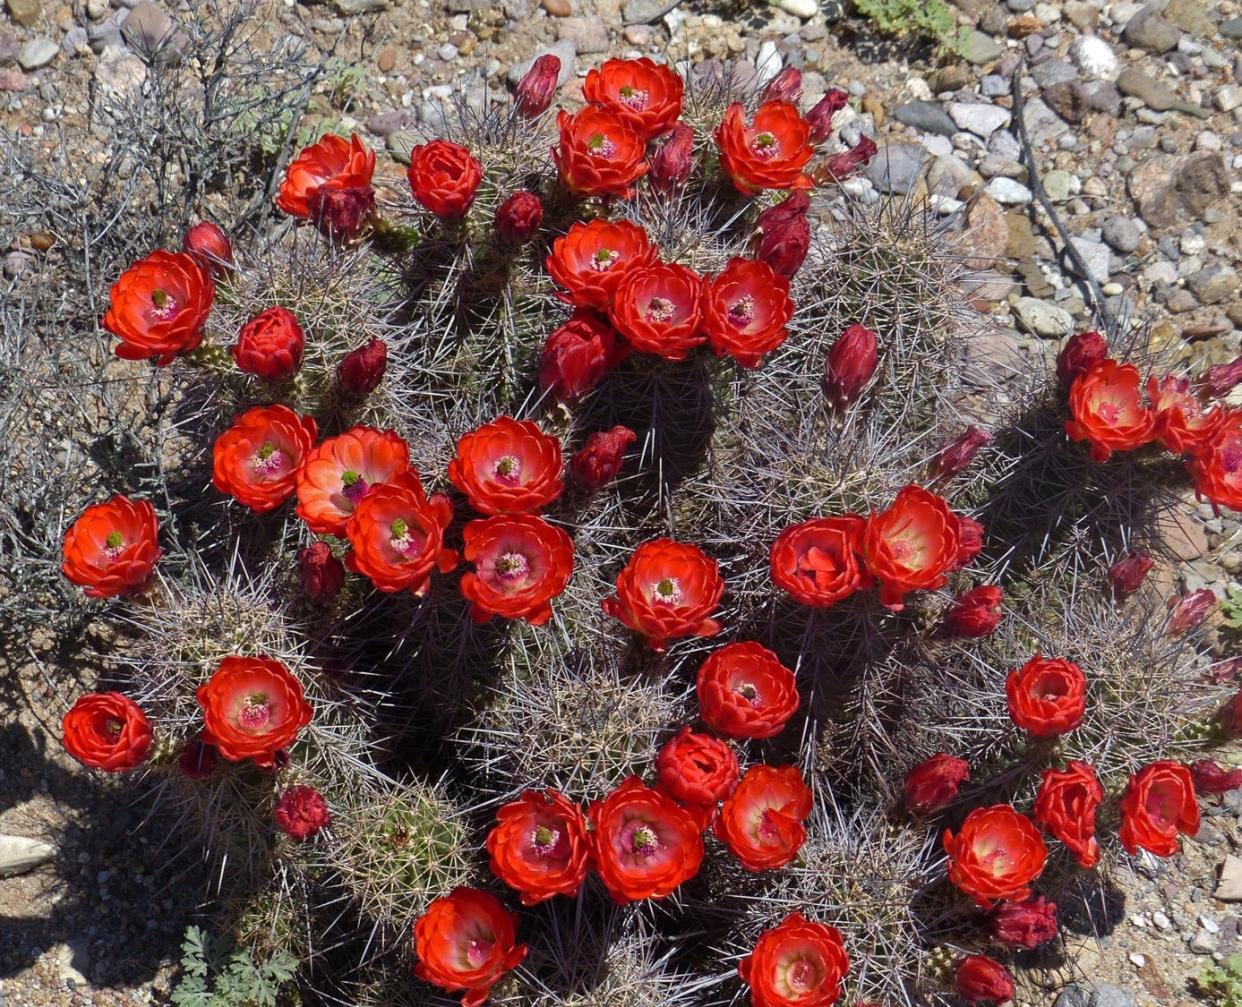 A claret cup cactus shows off its spectacular flowers.